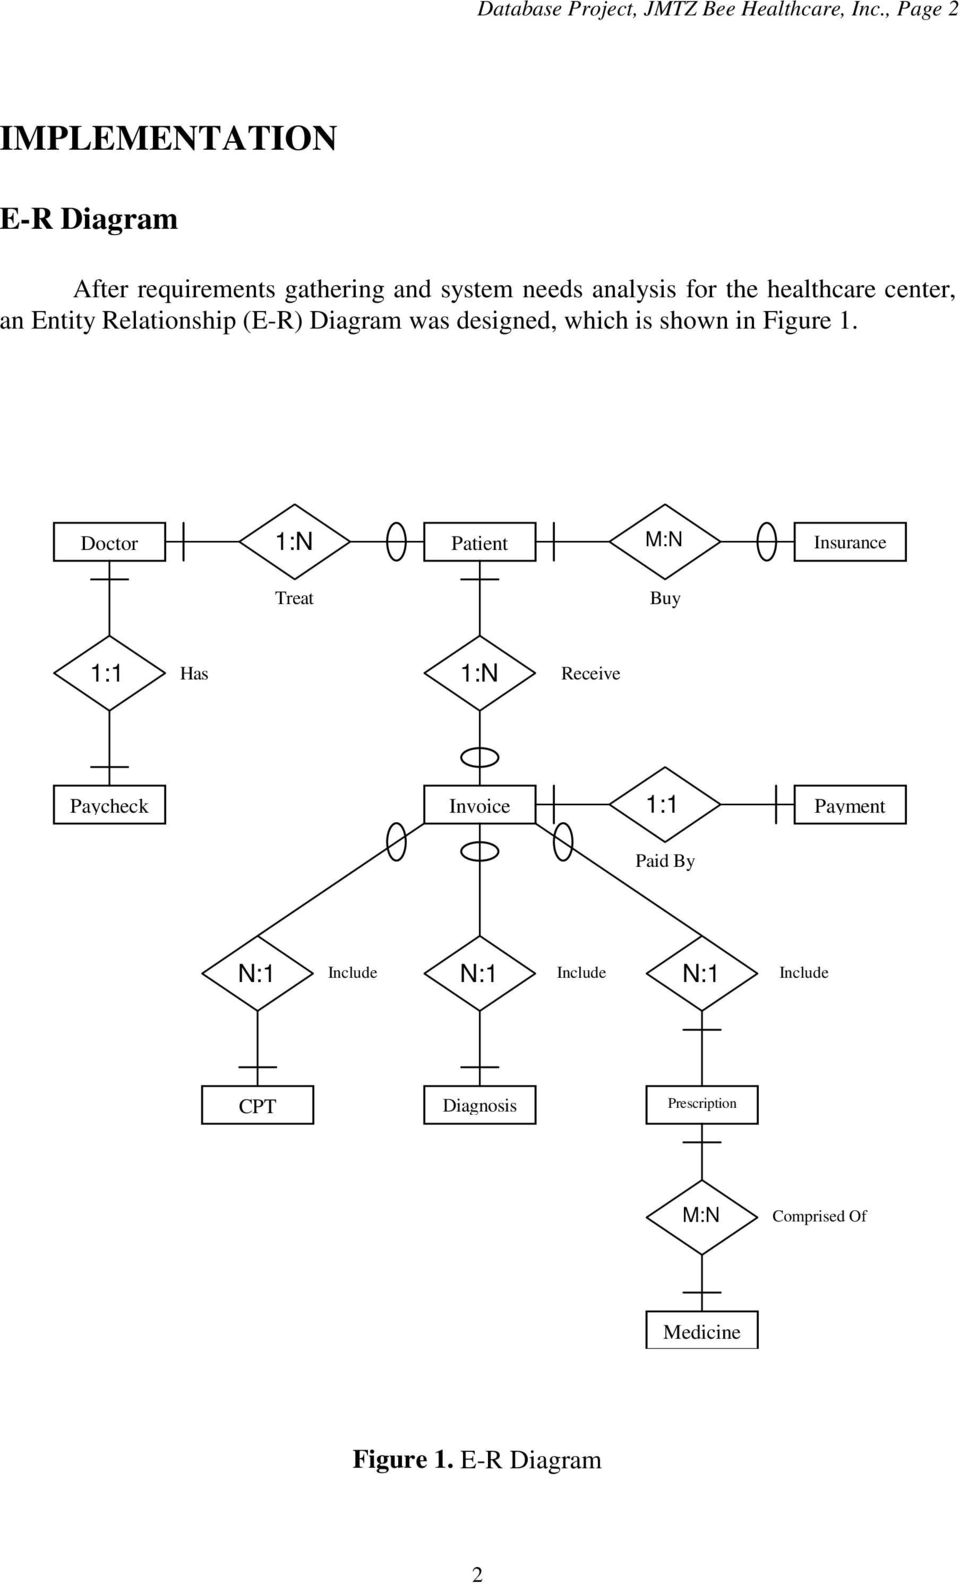 Healthcare Management System Database Project. Cis 9340 pertaining to Er Diagram Ax 2012